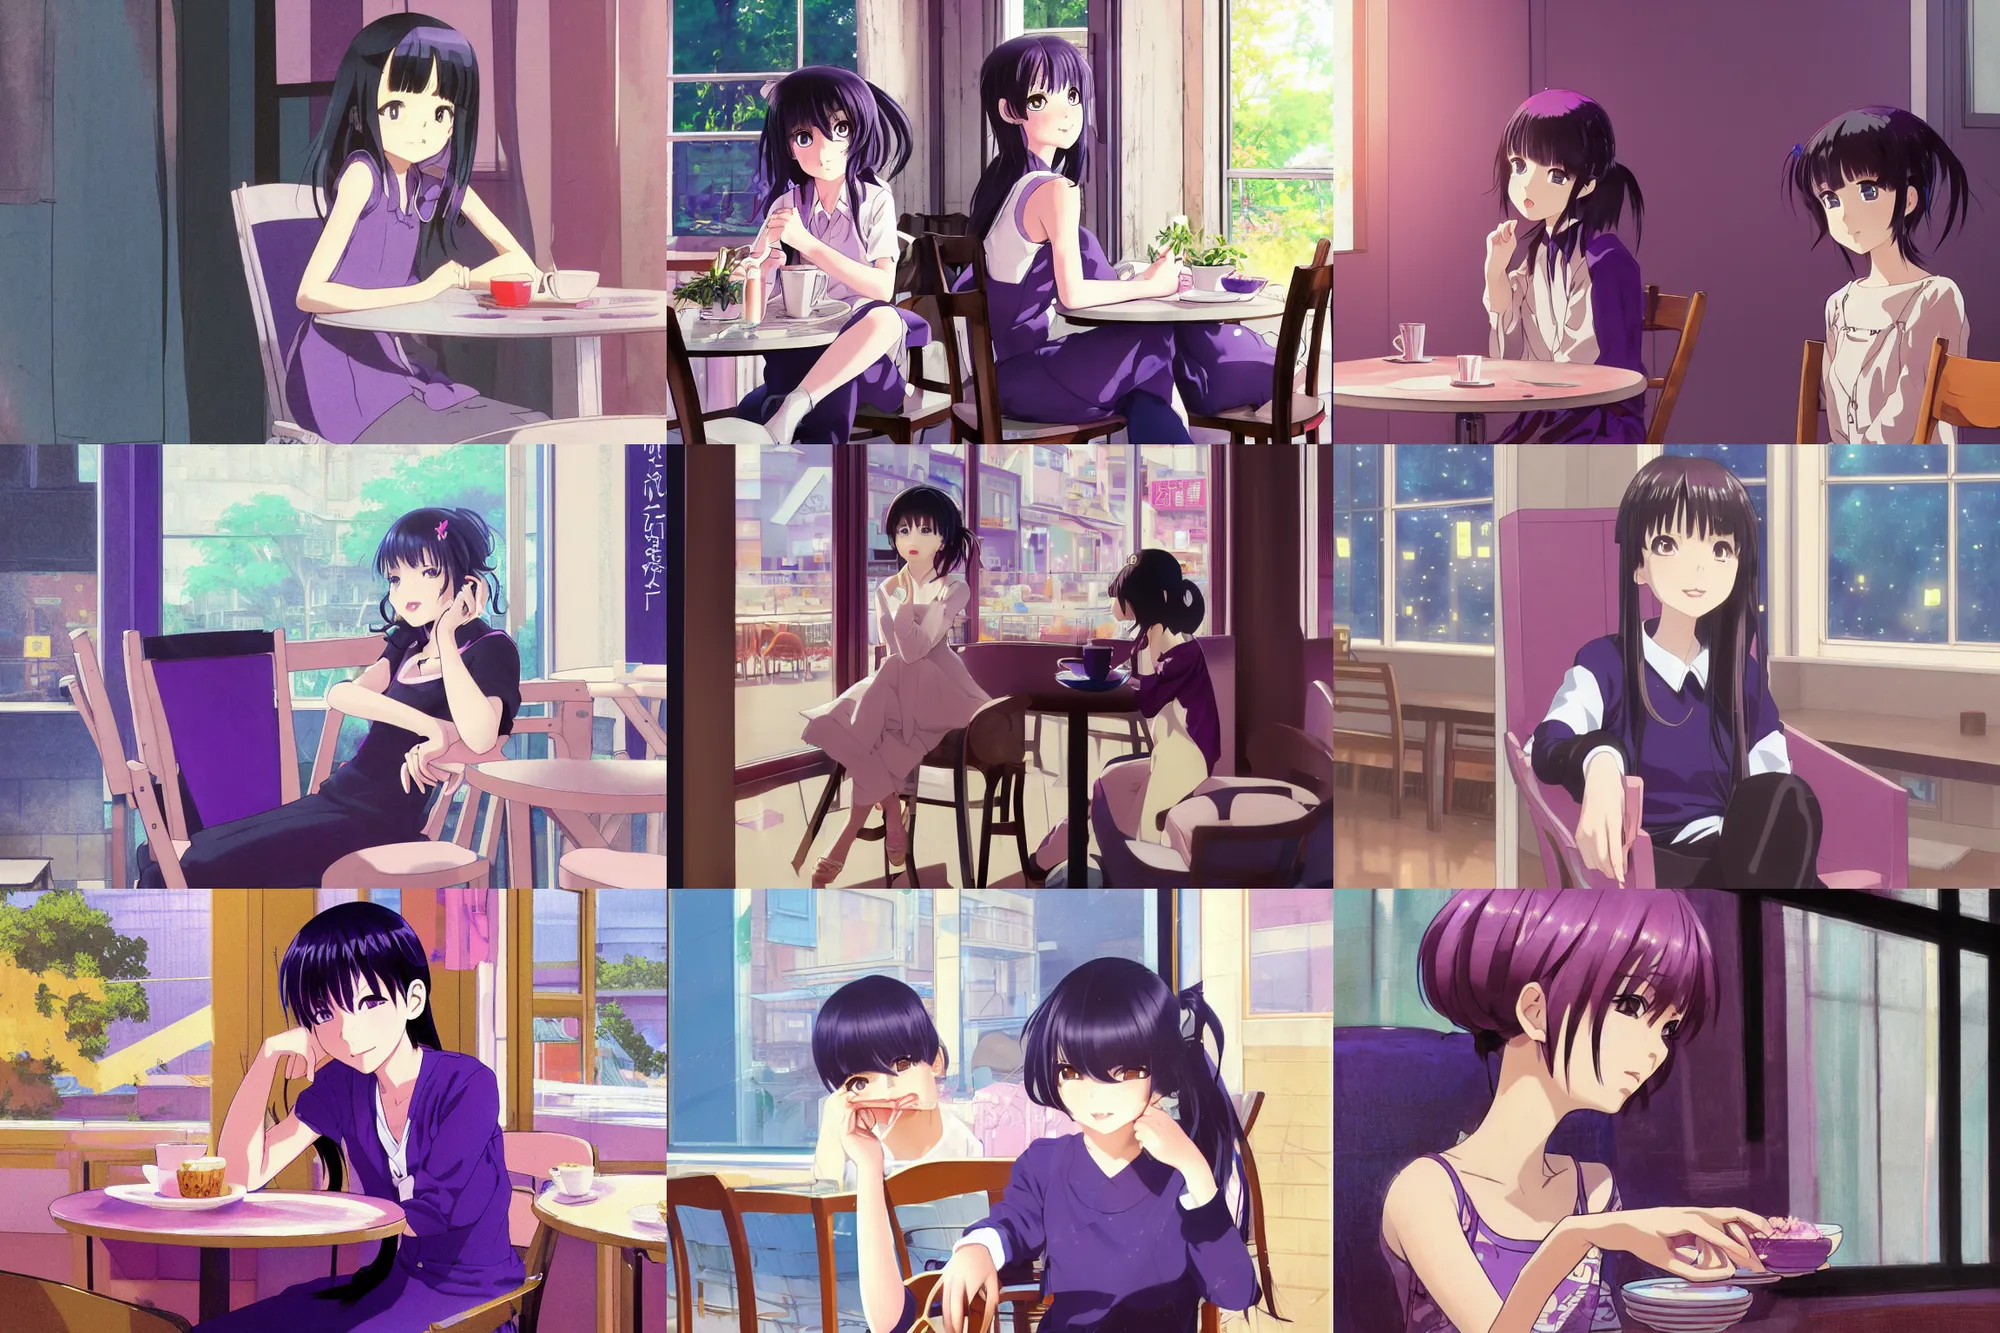 Prompt: anime film still portrait of a cute young girl with black hair and purple streaks, sitting in a cozy chair, in a cafe with big windows, by ilya kuvshinov yoshinari yoh makoto shinkai katsura masakazu kyoani, dynamic perspective pose detailed facial features rounded eyes, crisp and sharp, cel shading, ambient light